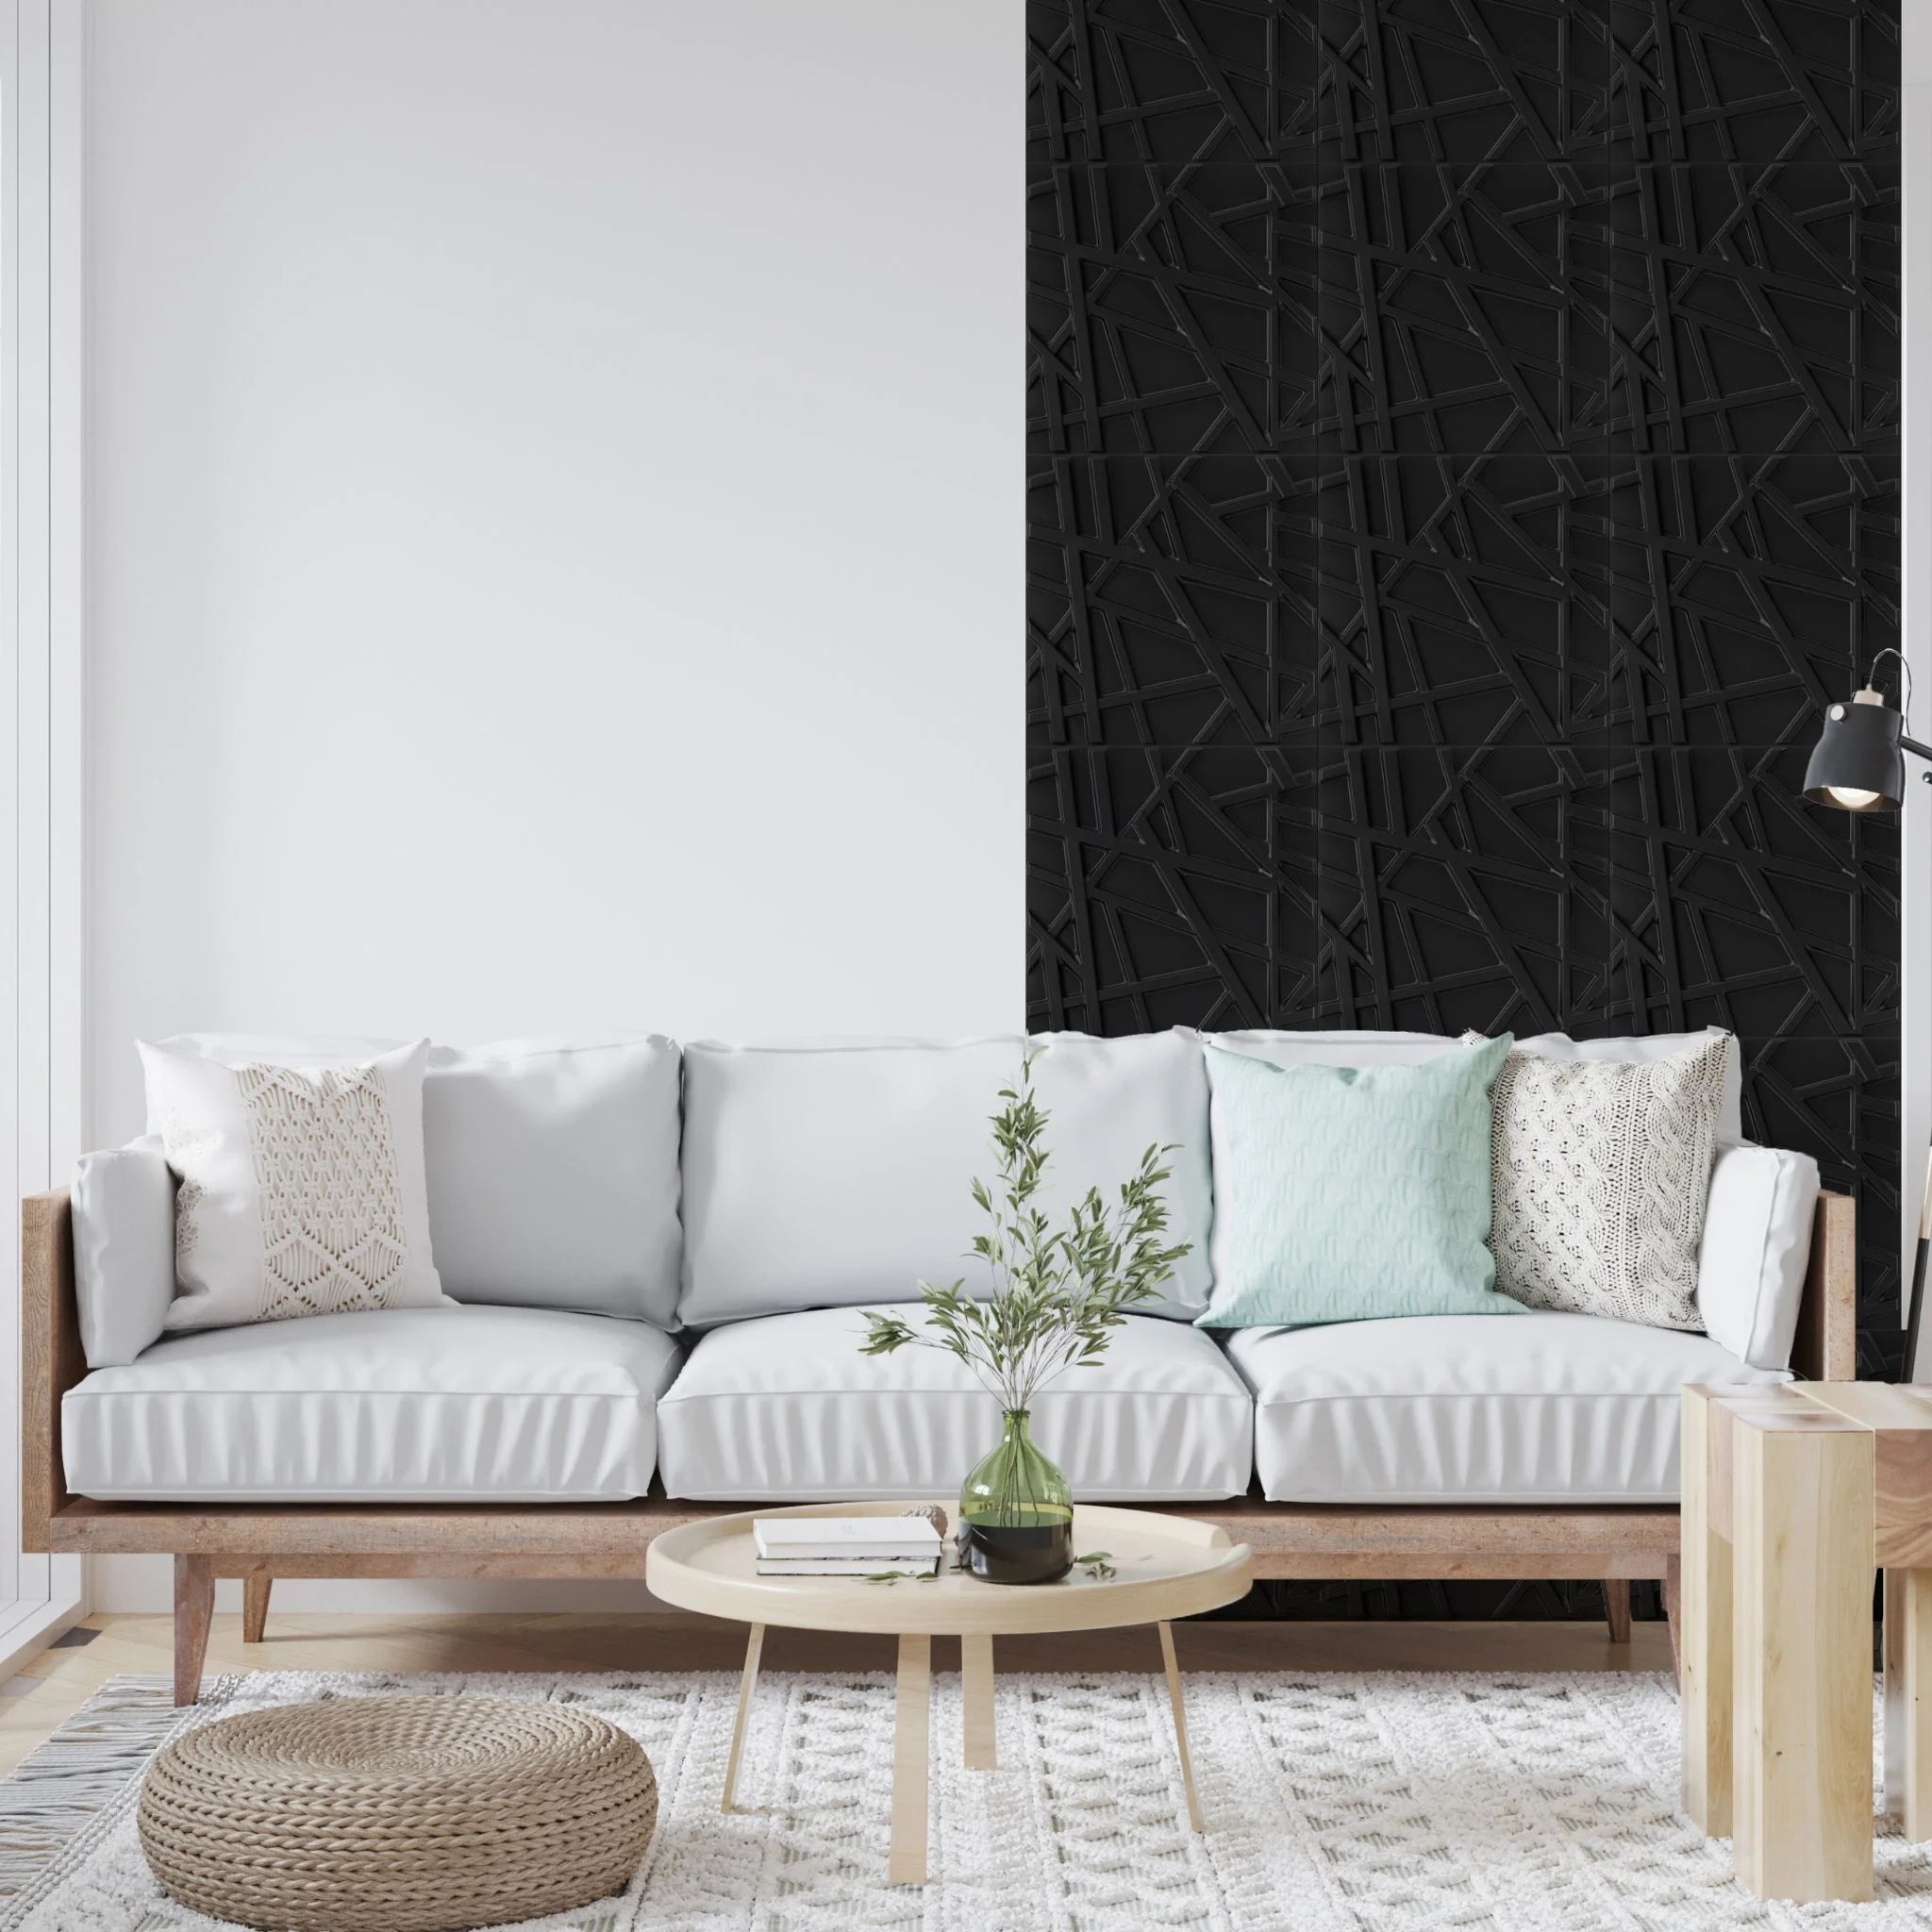 Black PVC wall panel with crisscross design in stylish living room